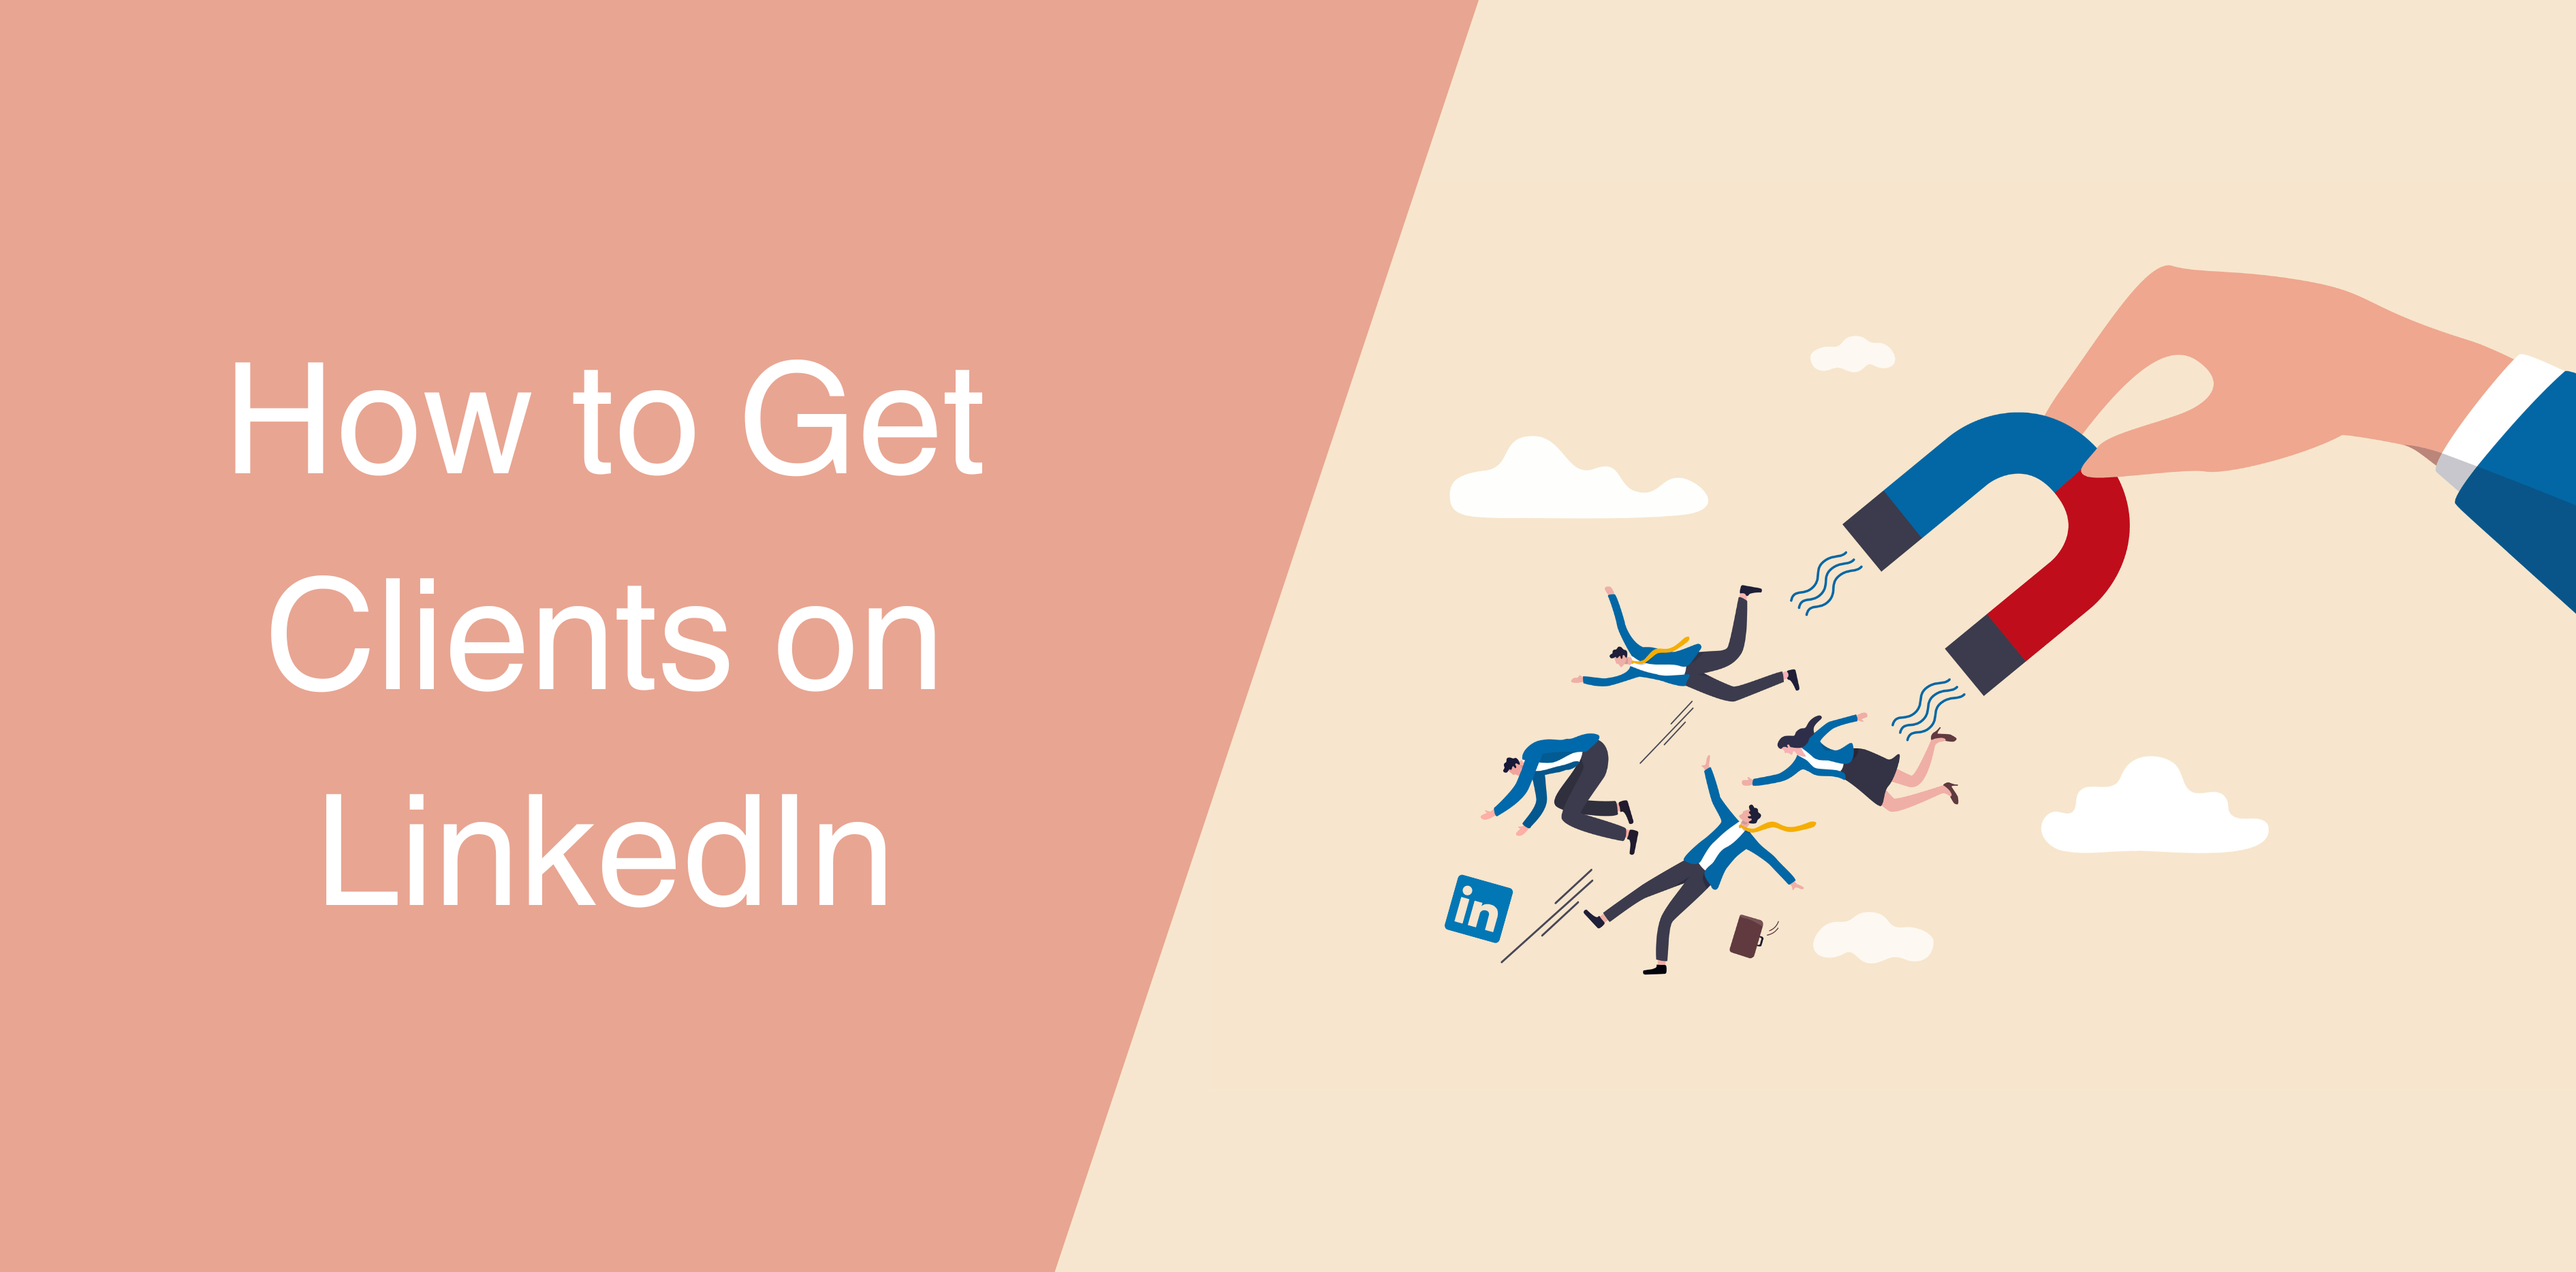 How to Get Clients on LinkedIn